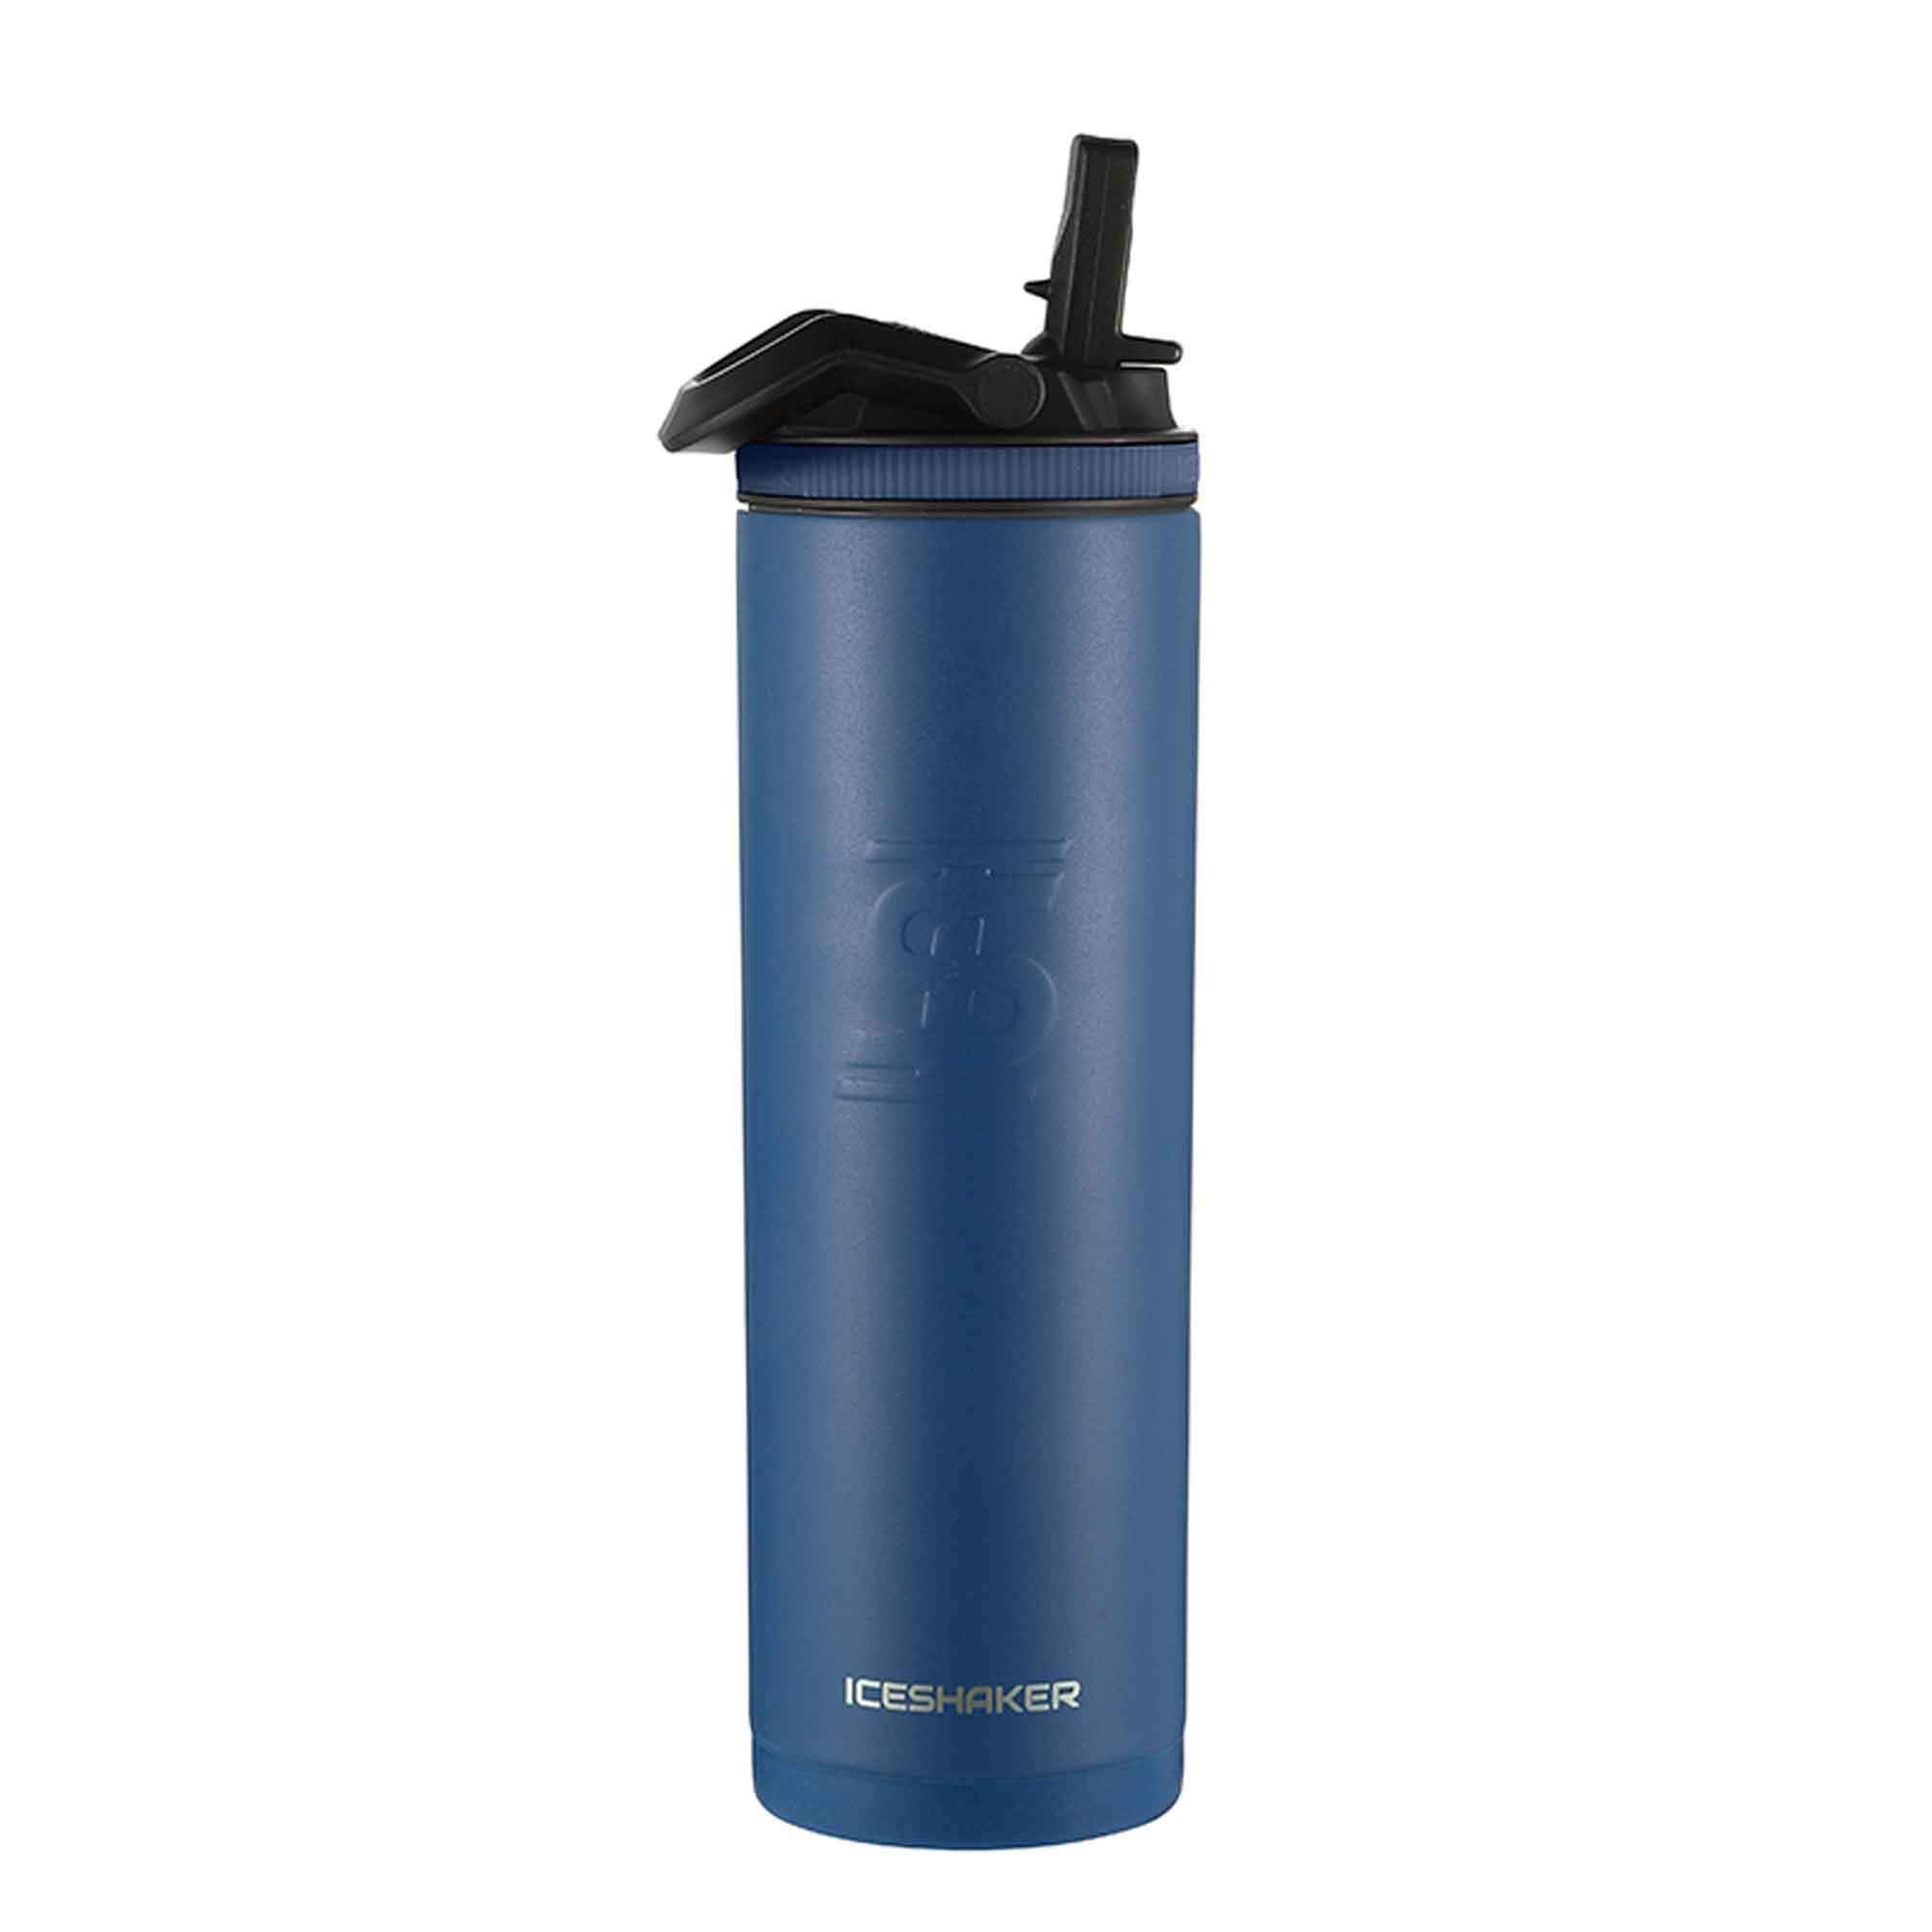  Tal Water Bottle Double Wall Insulated Stainless Steel Ranger  Pro - 26oz - Black : Sports & Outdoors